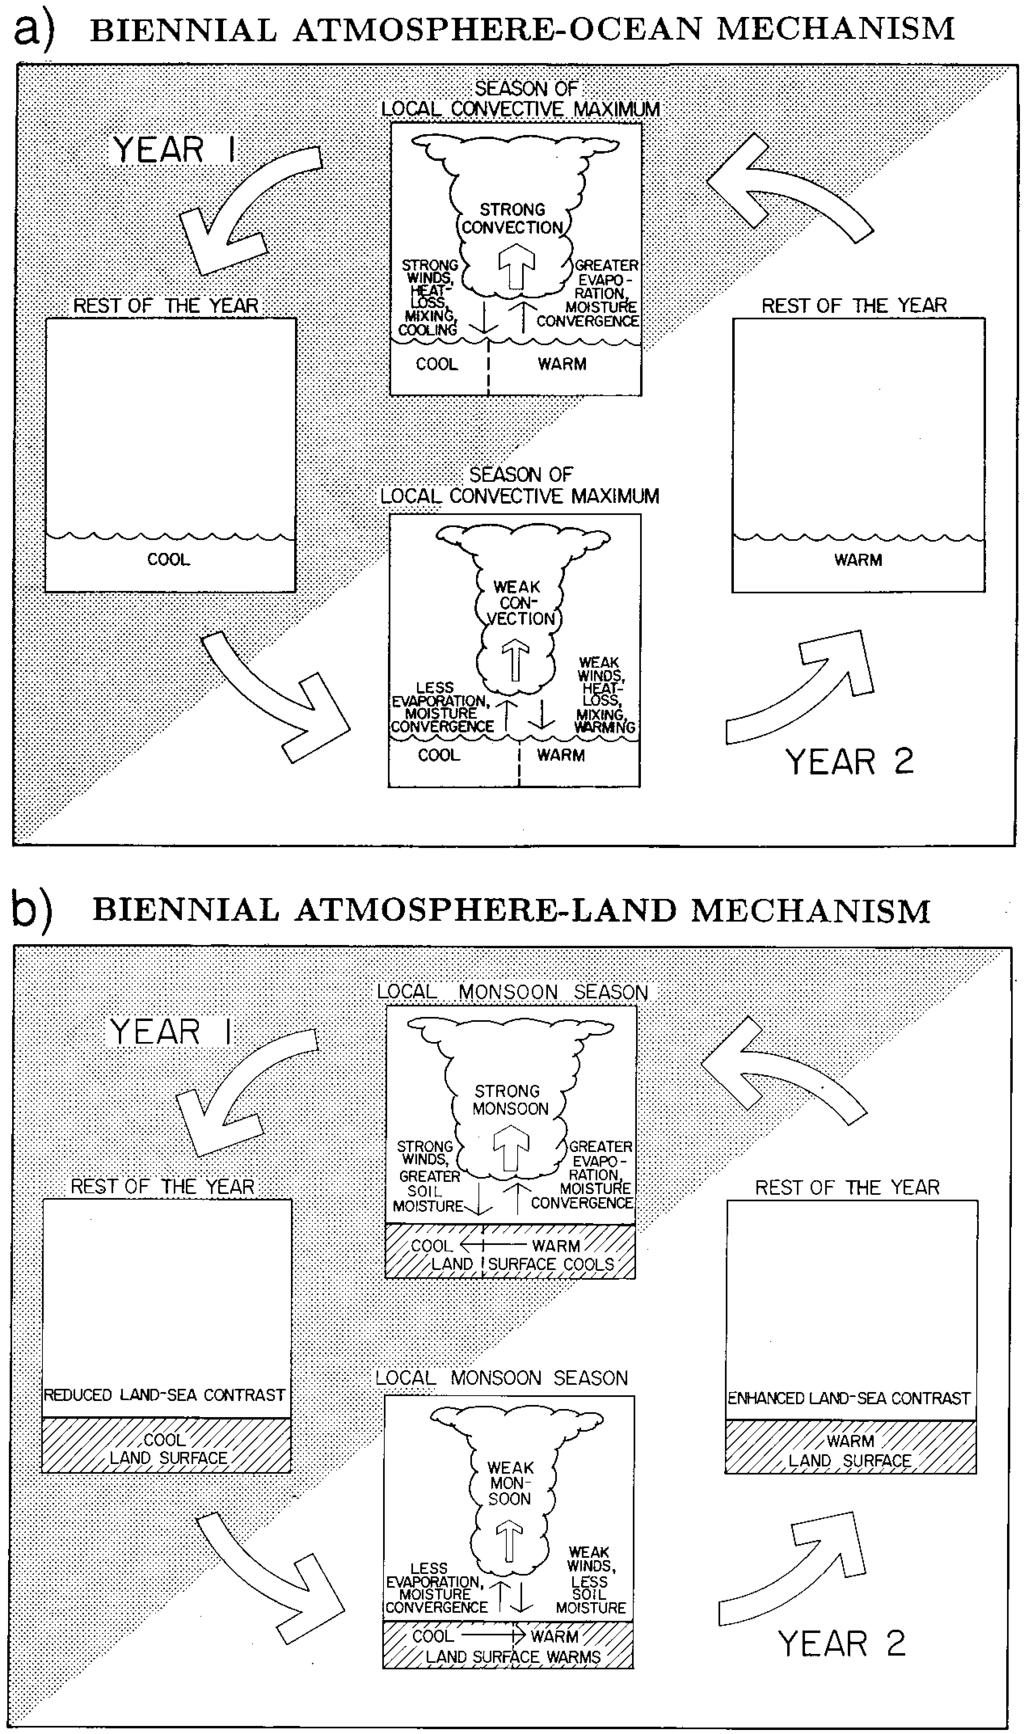 1923 FIG. 1. (a) Schematic illustration of the biennial atmosphere ocean mechanism. (b) Same as (a) except for the biennial atmosphere land mechanism. contribute to weaker convective activity.